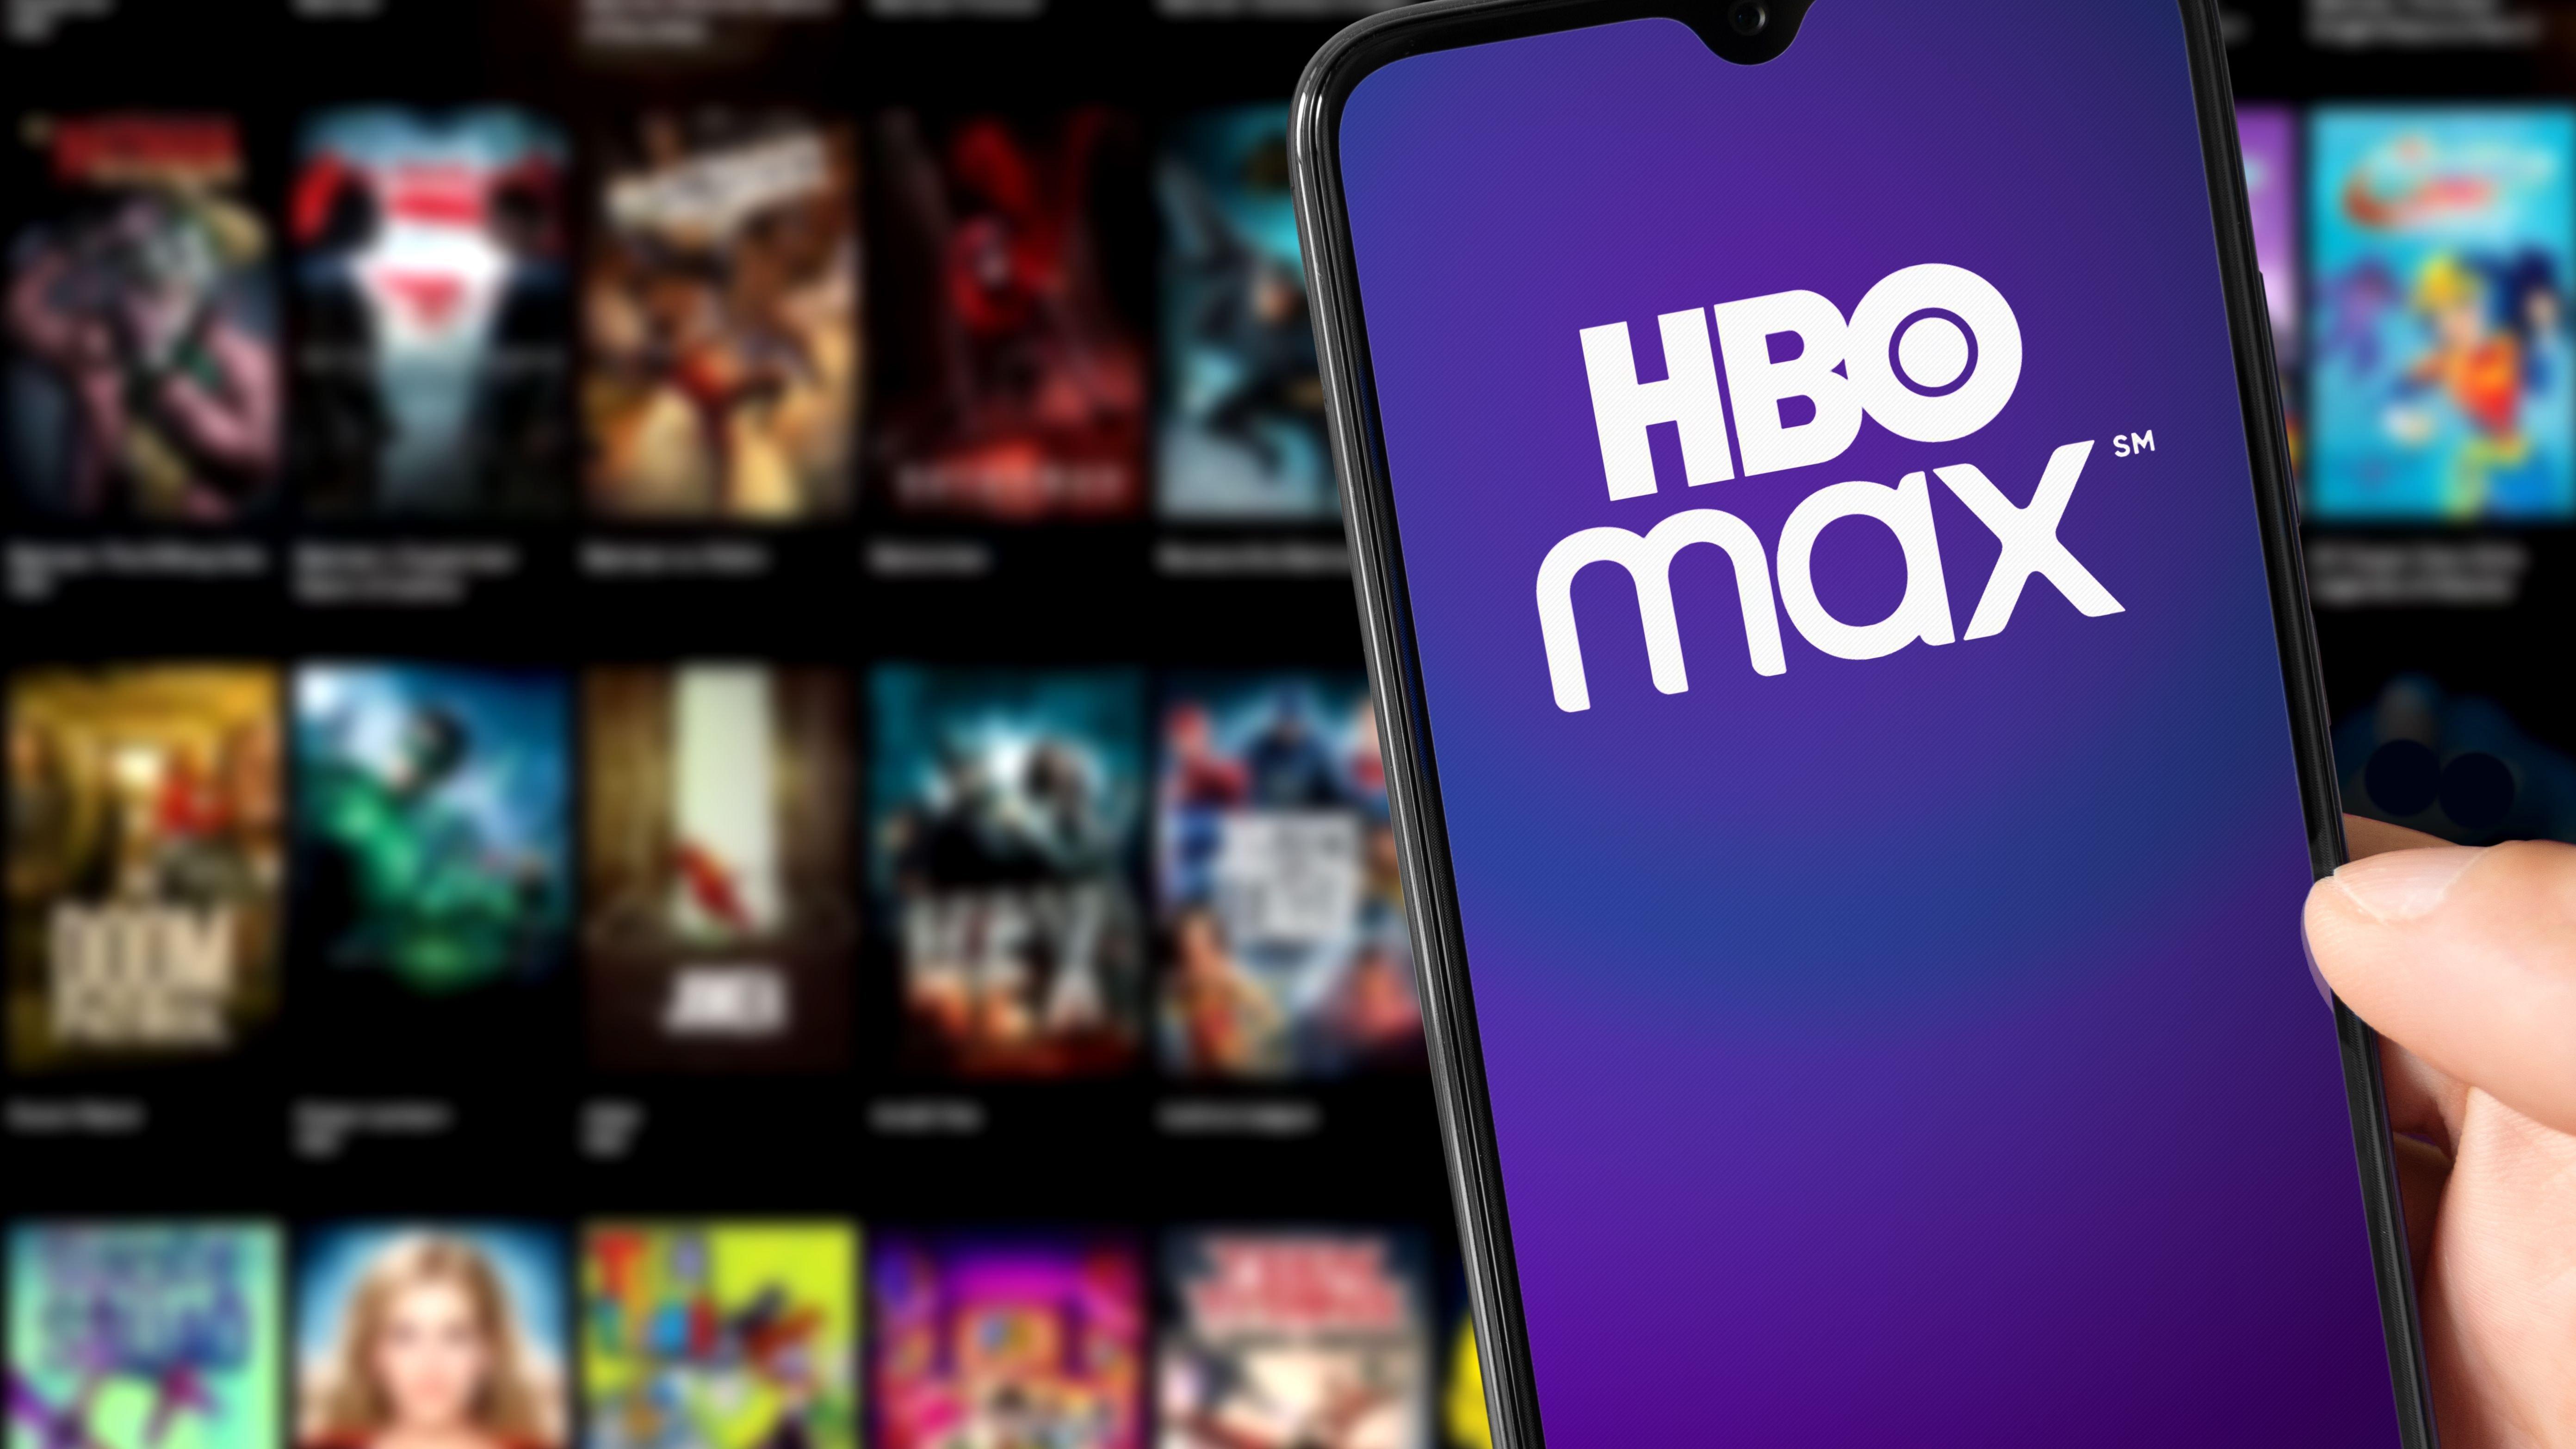 HBO Max logo on phone